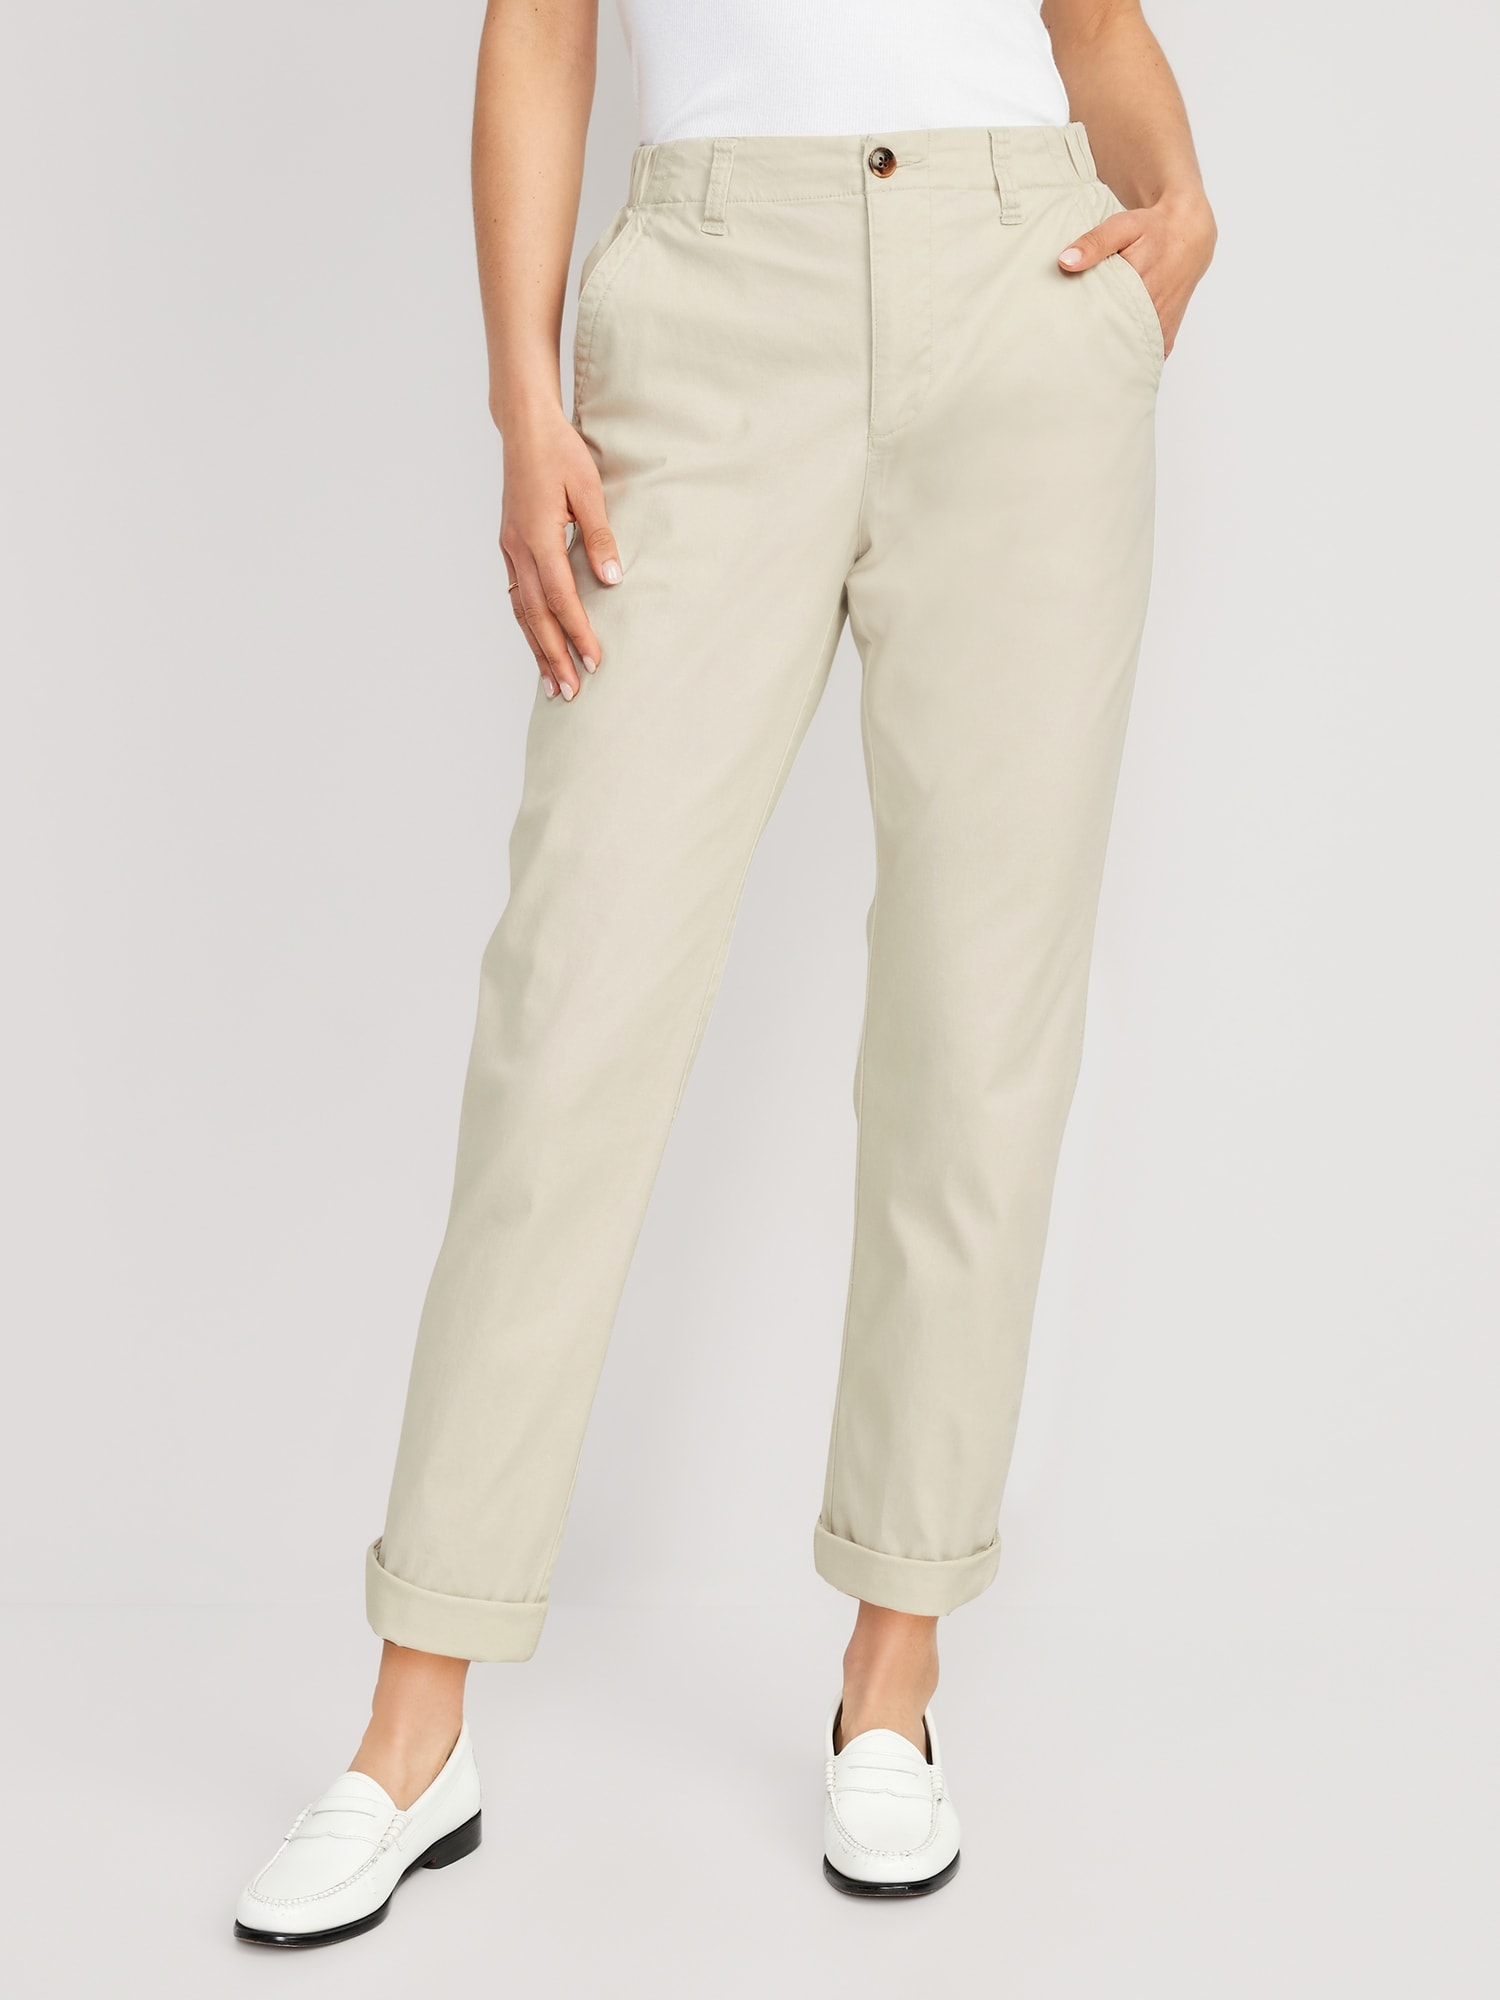 Chinos For Women